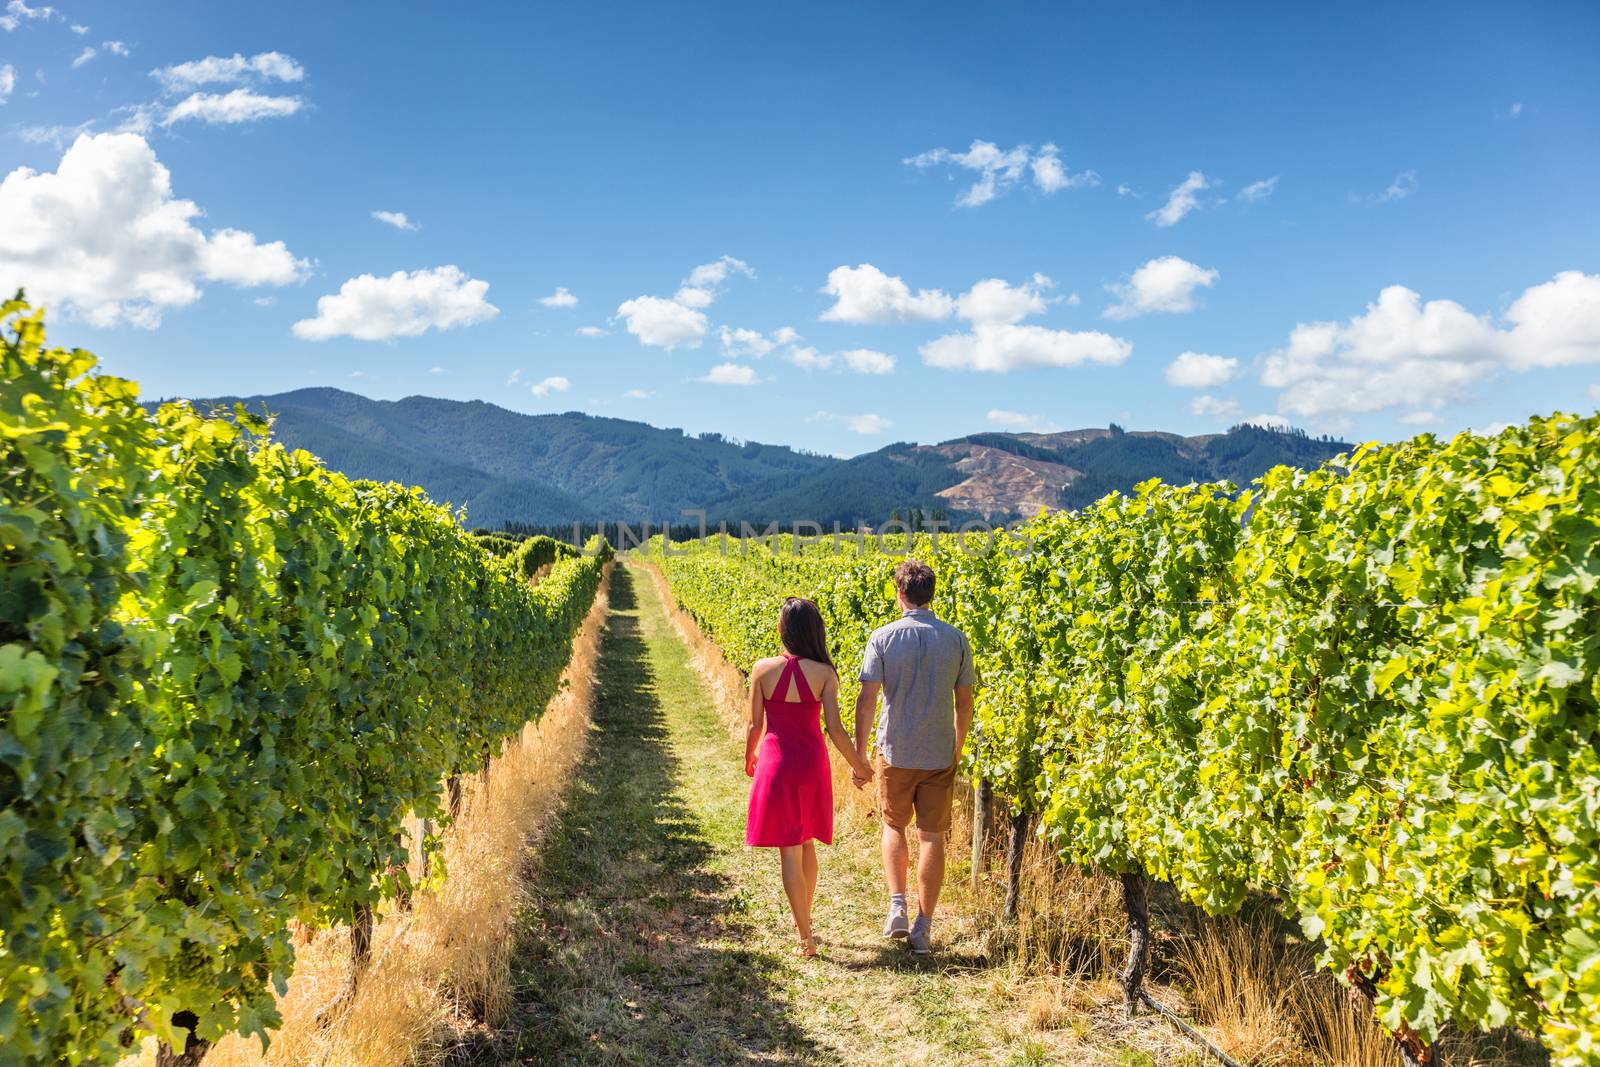 Vineyard couple tourists New Zealand travel visiting Marlborough region winery walking amongst grapevines. People on holiday wine tasting experience in summer valley landscape. by Maridav